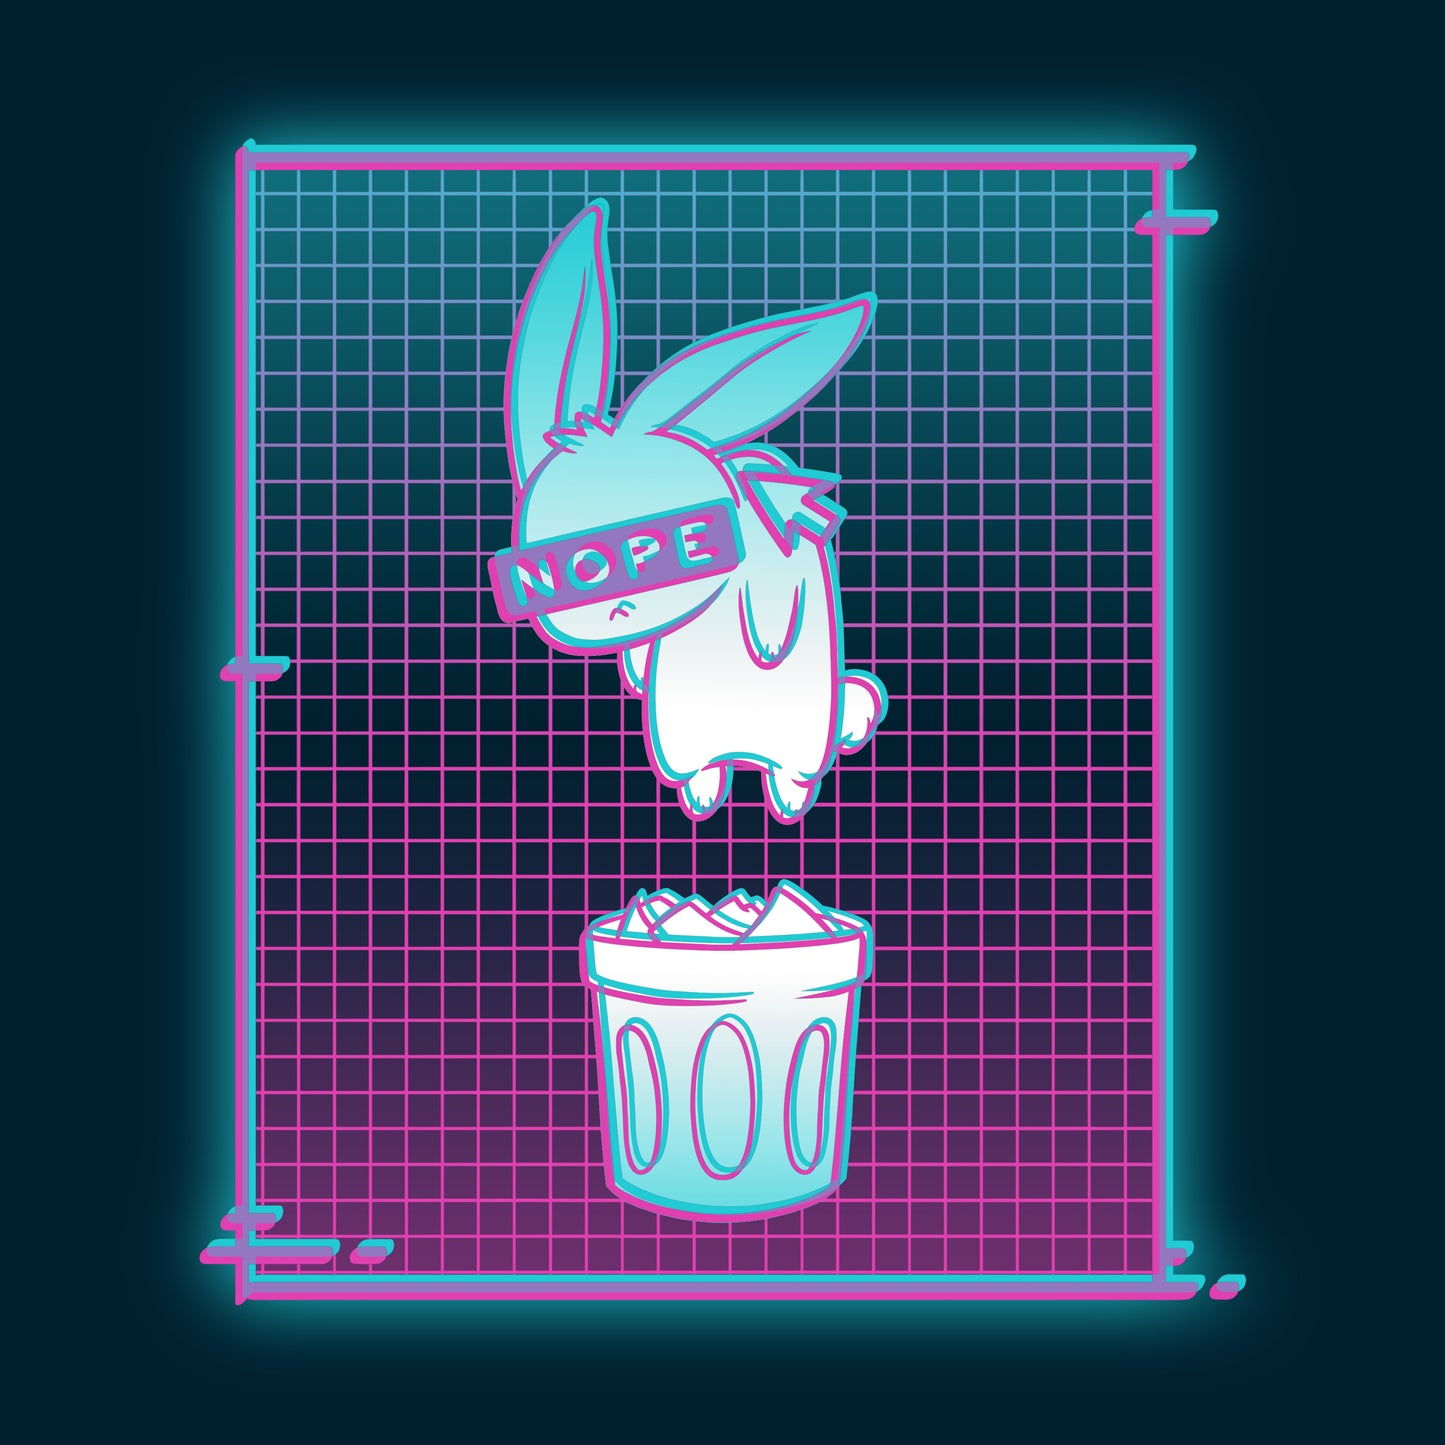 A TeeTurtle Digital Trash Bunny T-shirt featuring an image of a rabbit in a trash can.